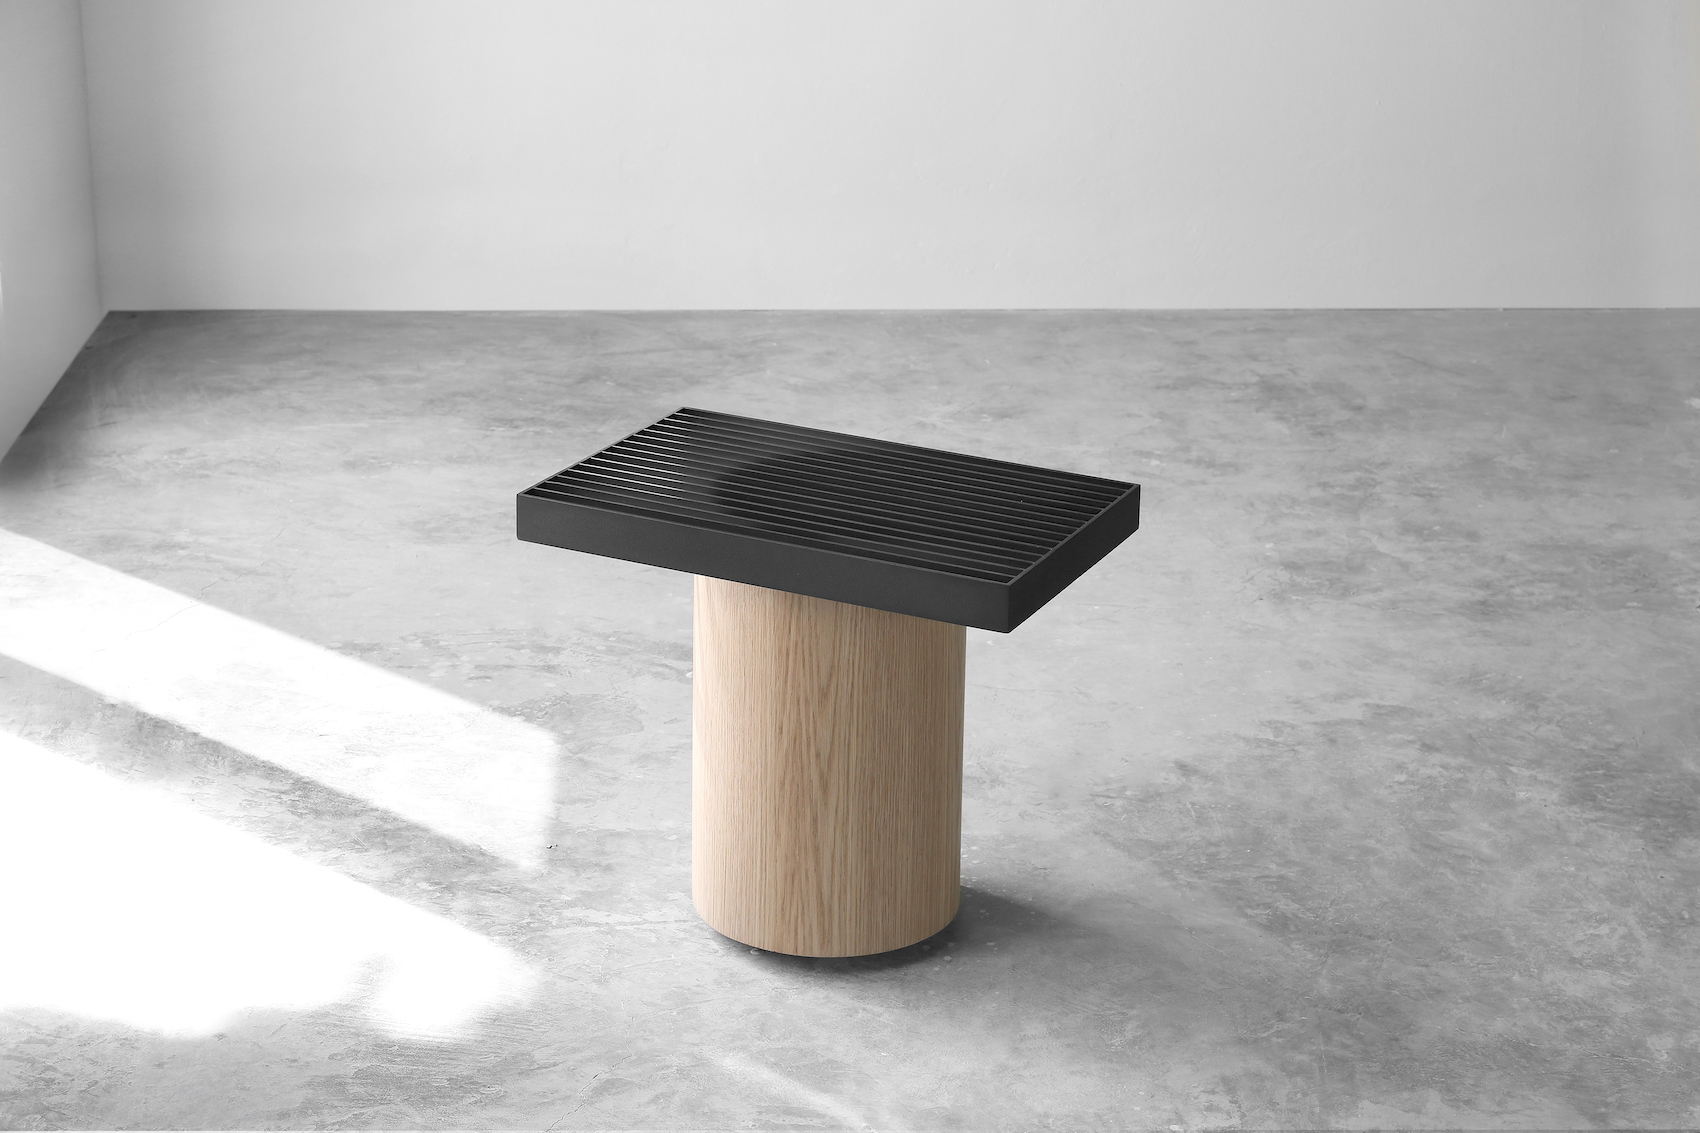 Minimalist Collection of Furniture "Laws of Motion" by Joel Escalona for BREUR